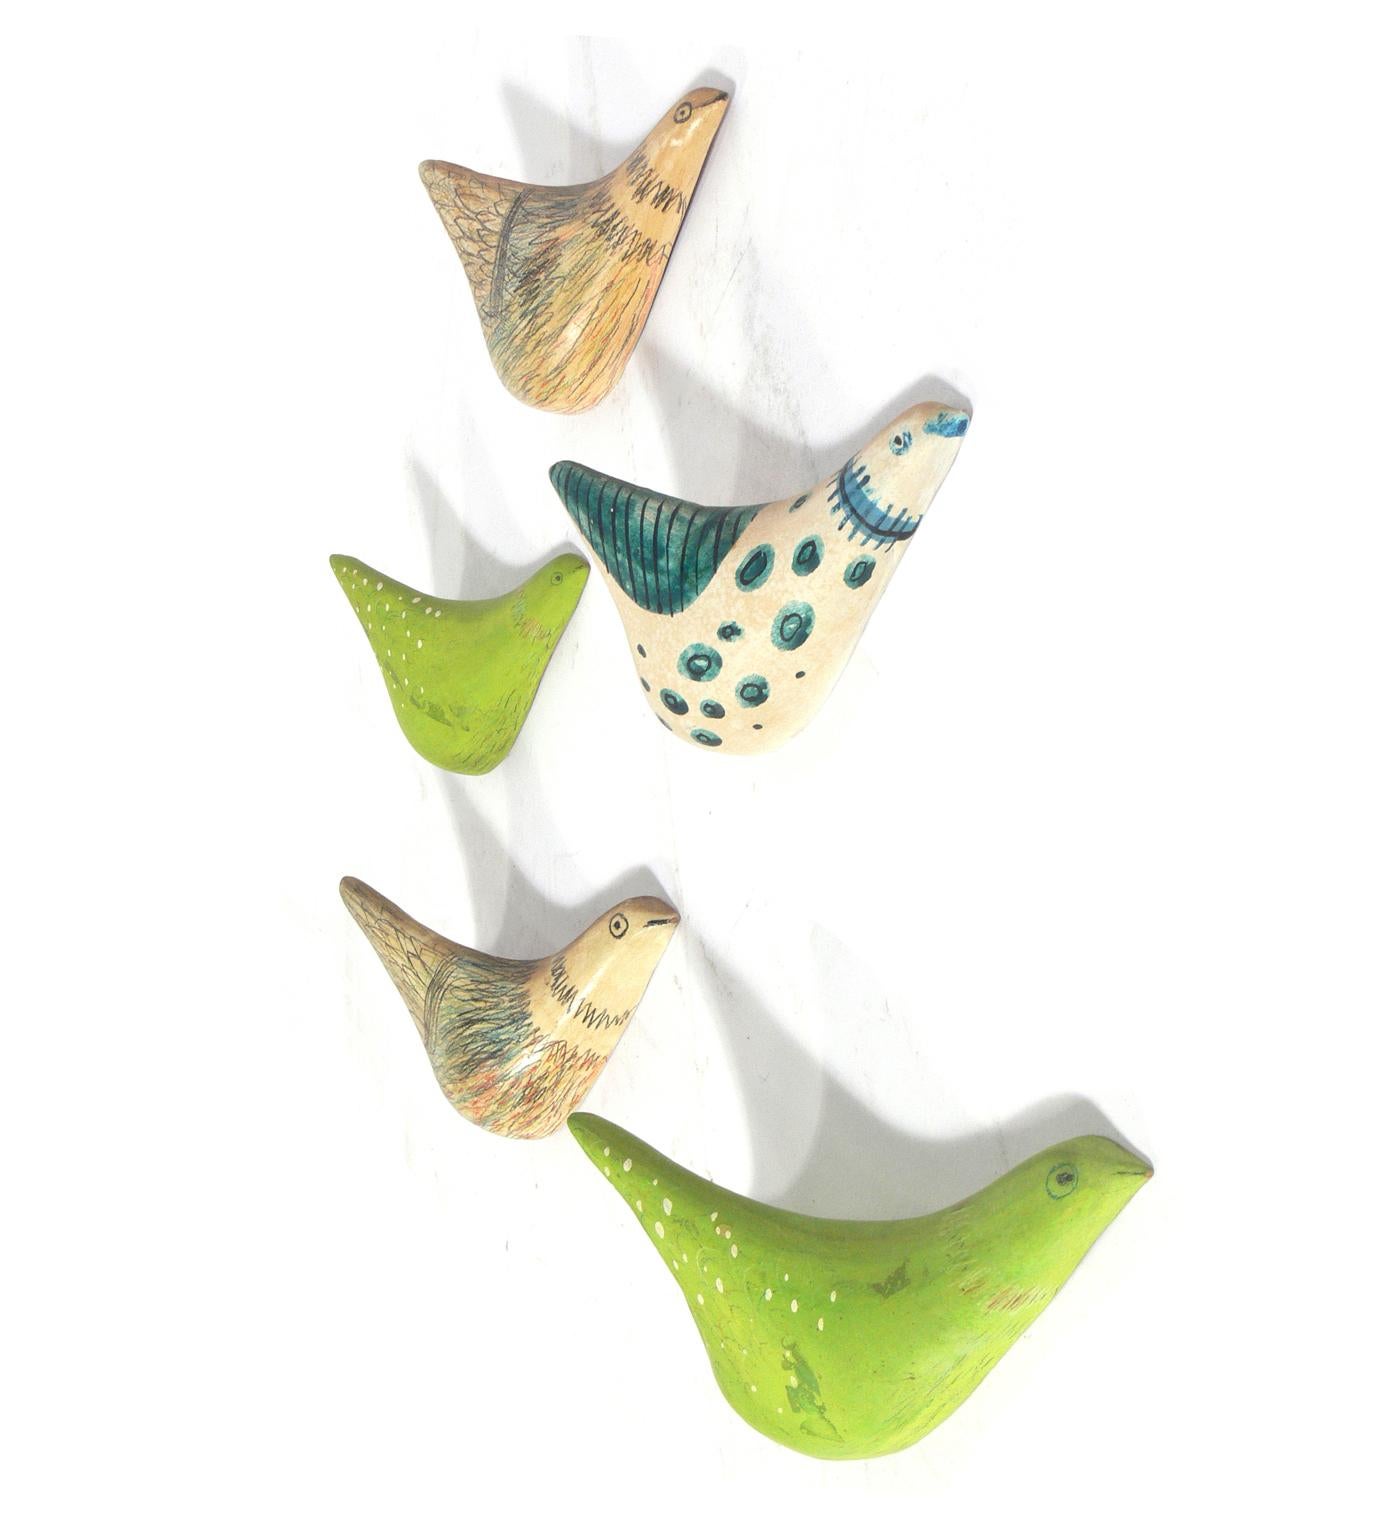 Flock of Italian Ceramic Birds, Italy circa 1950s. They make a colorful wall mounted sculpture. The largest measures 9